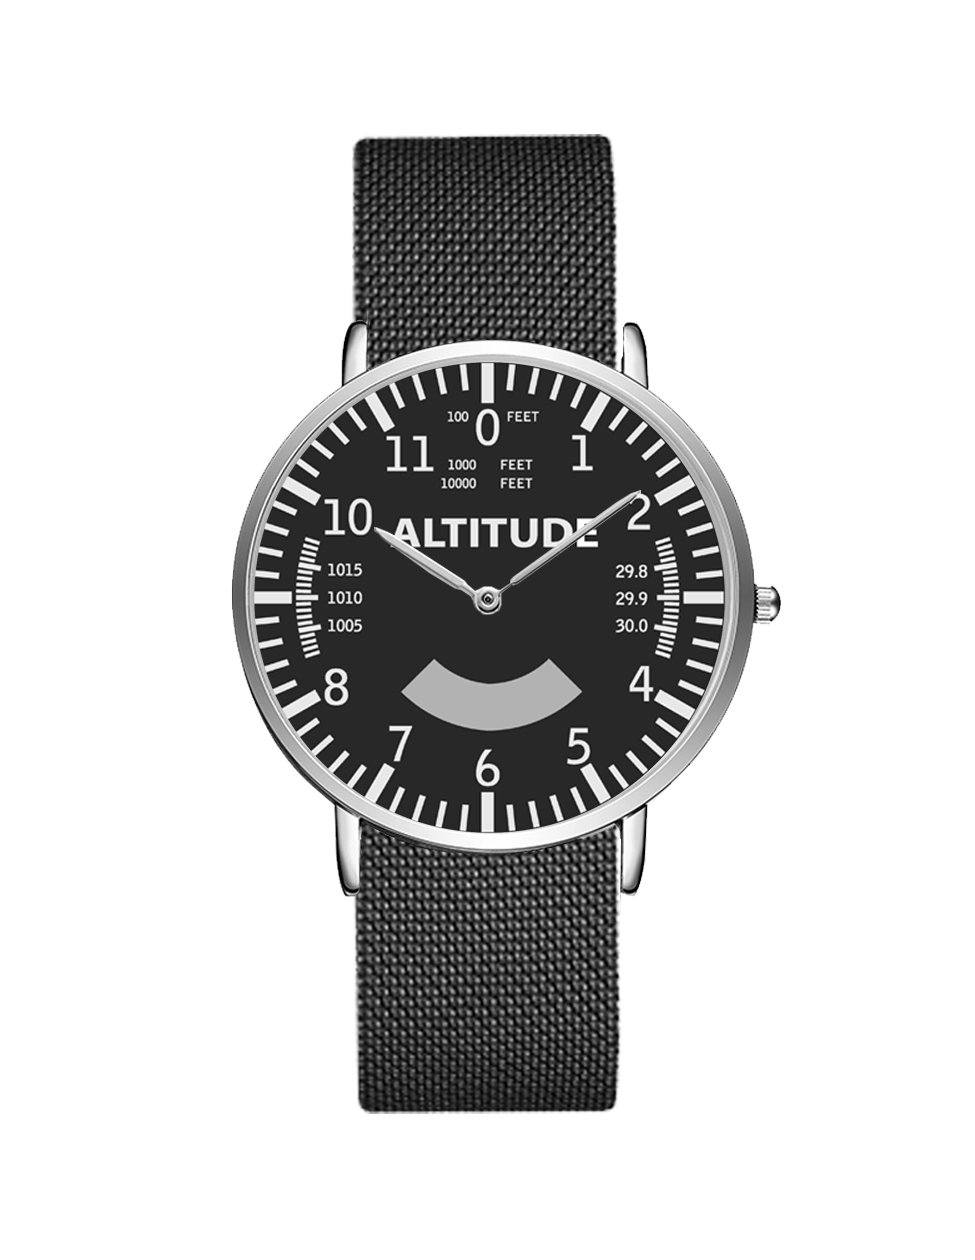 Airplane Instrument Series (Altitude) Stainless Steel Strap Watches Pilot Eyes Store Silver & Black Stainless Steel Strap 